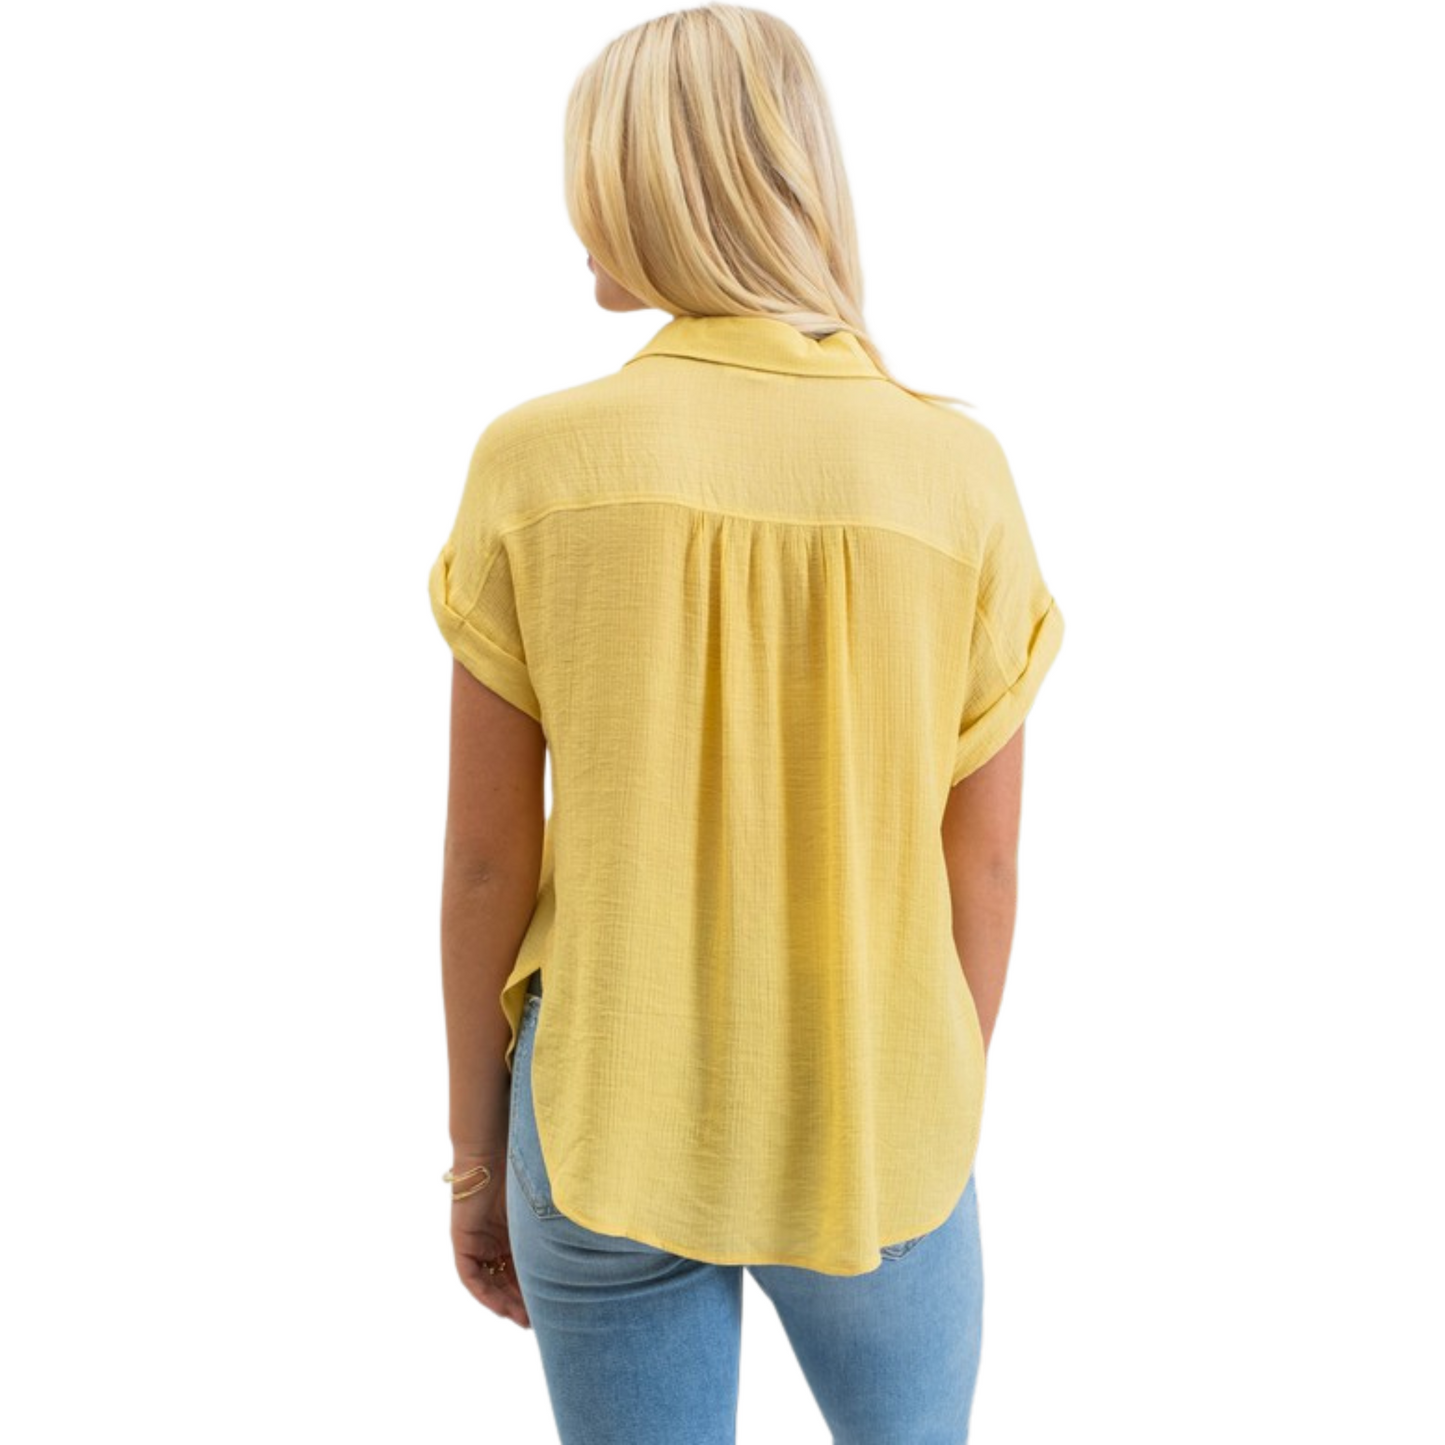 Upgrade your wardrobe with our Mid Button Down Woven Top. Featuring a pointed collar, functional buttons on the front, and folded cuff short sleeves, this top offers a polished and professional look. The back yoke and shirring detail add a touch of style while the dusty yellow color brings a pop of color. Not lined for comfortable wear.